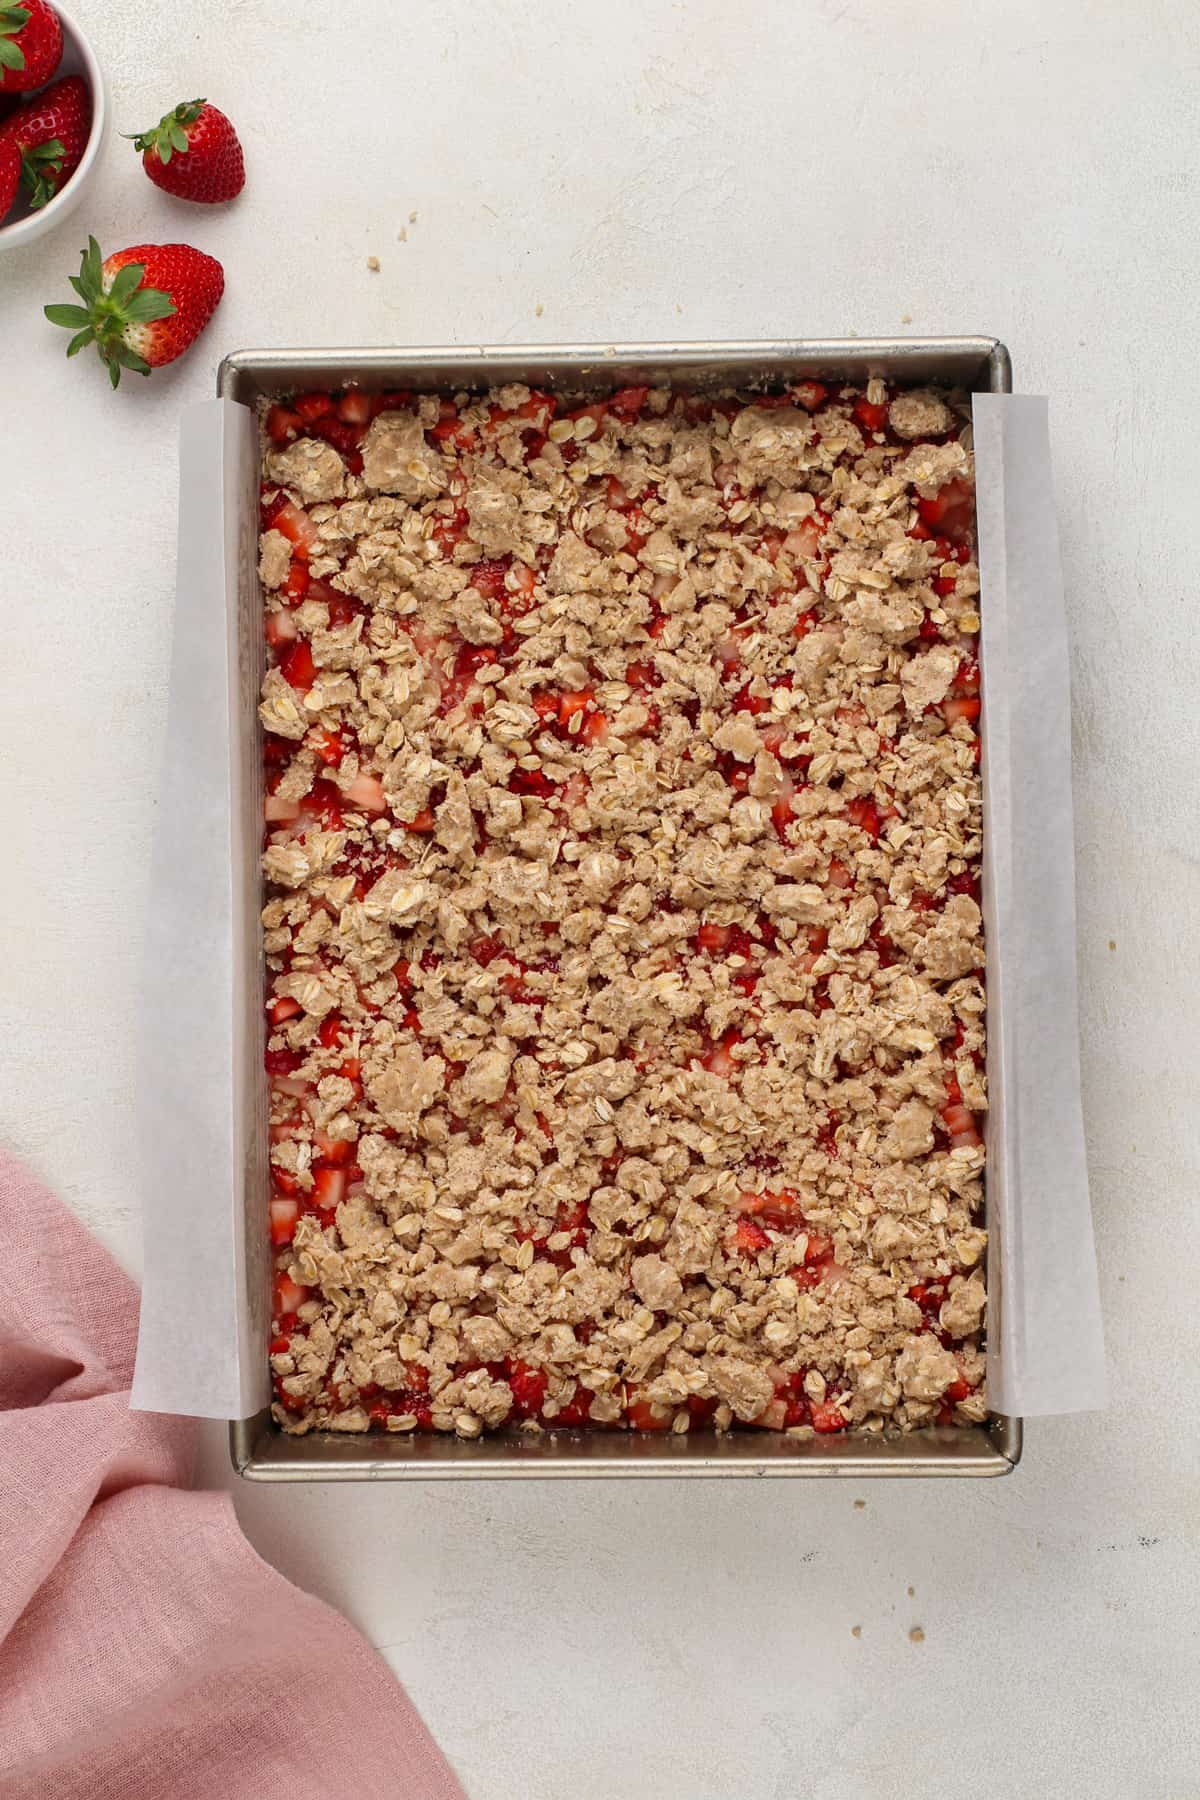 Assembled strawberry oat bars ready to go in the oven.